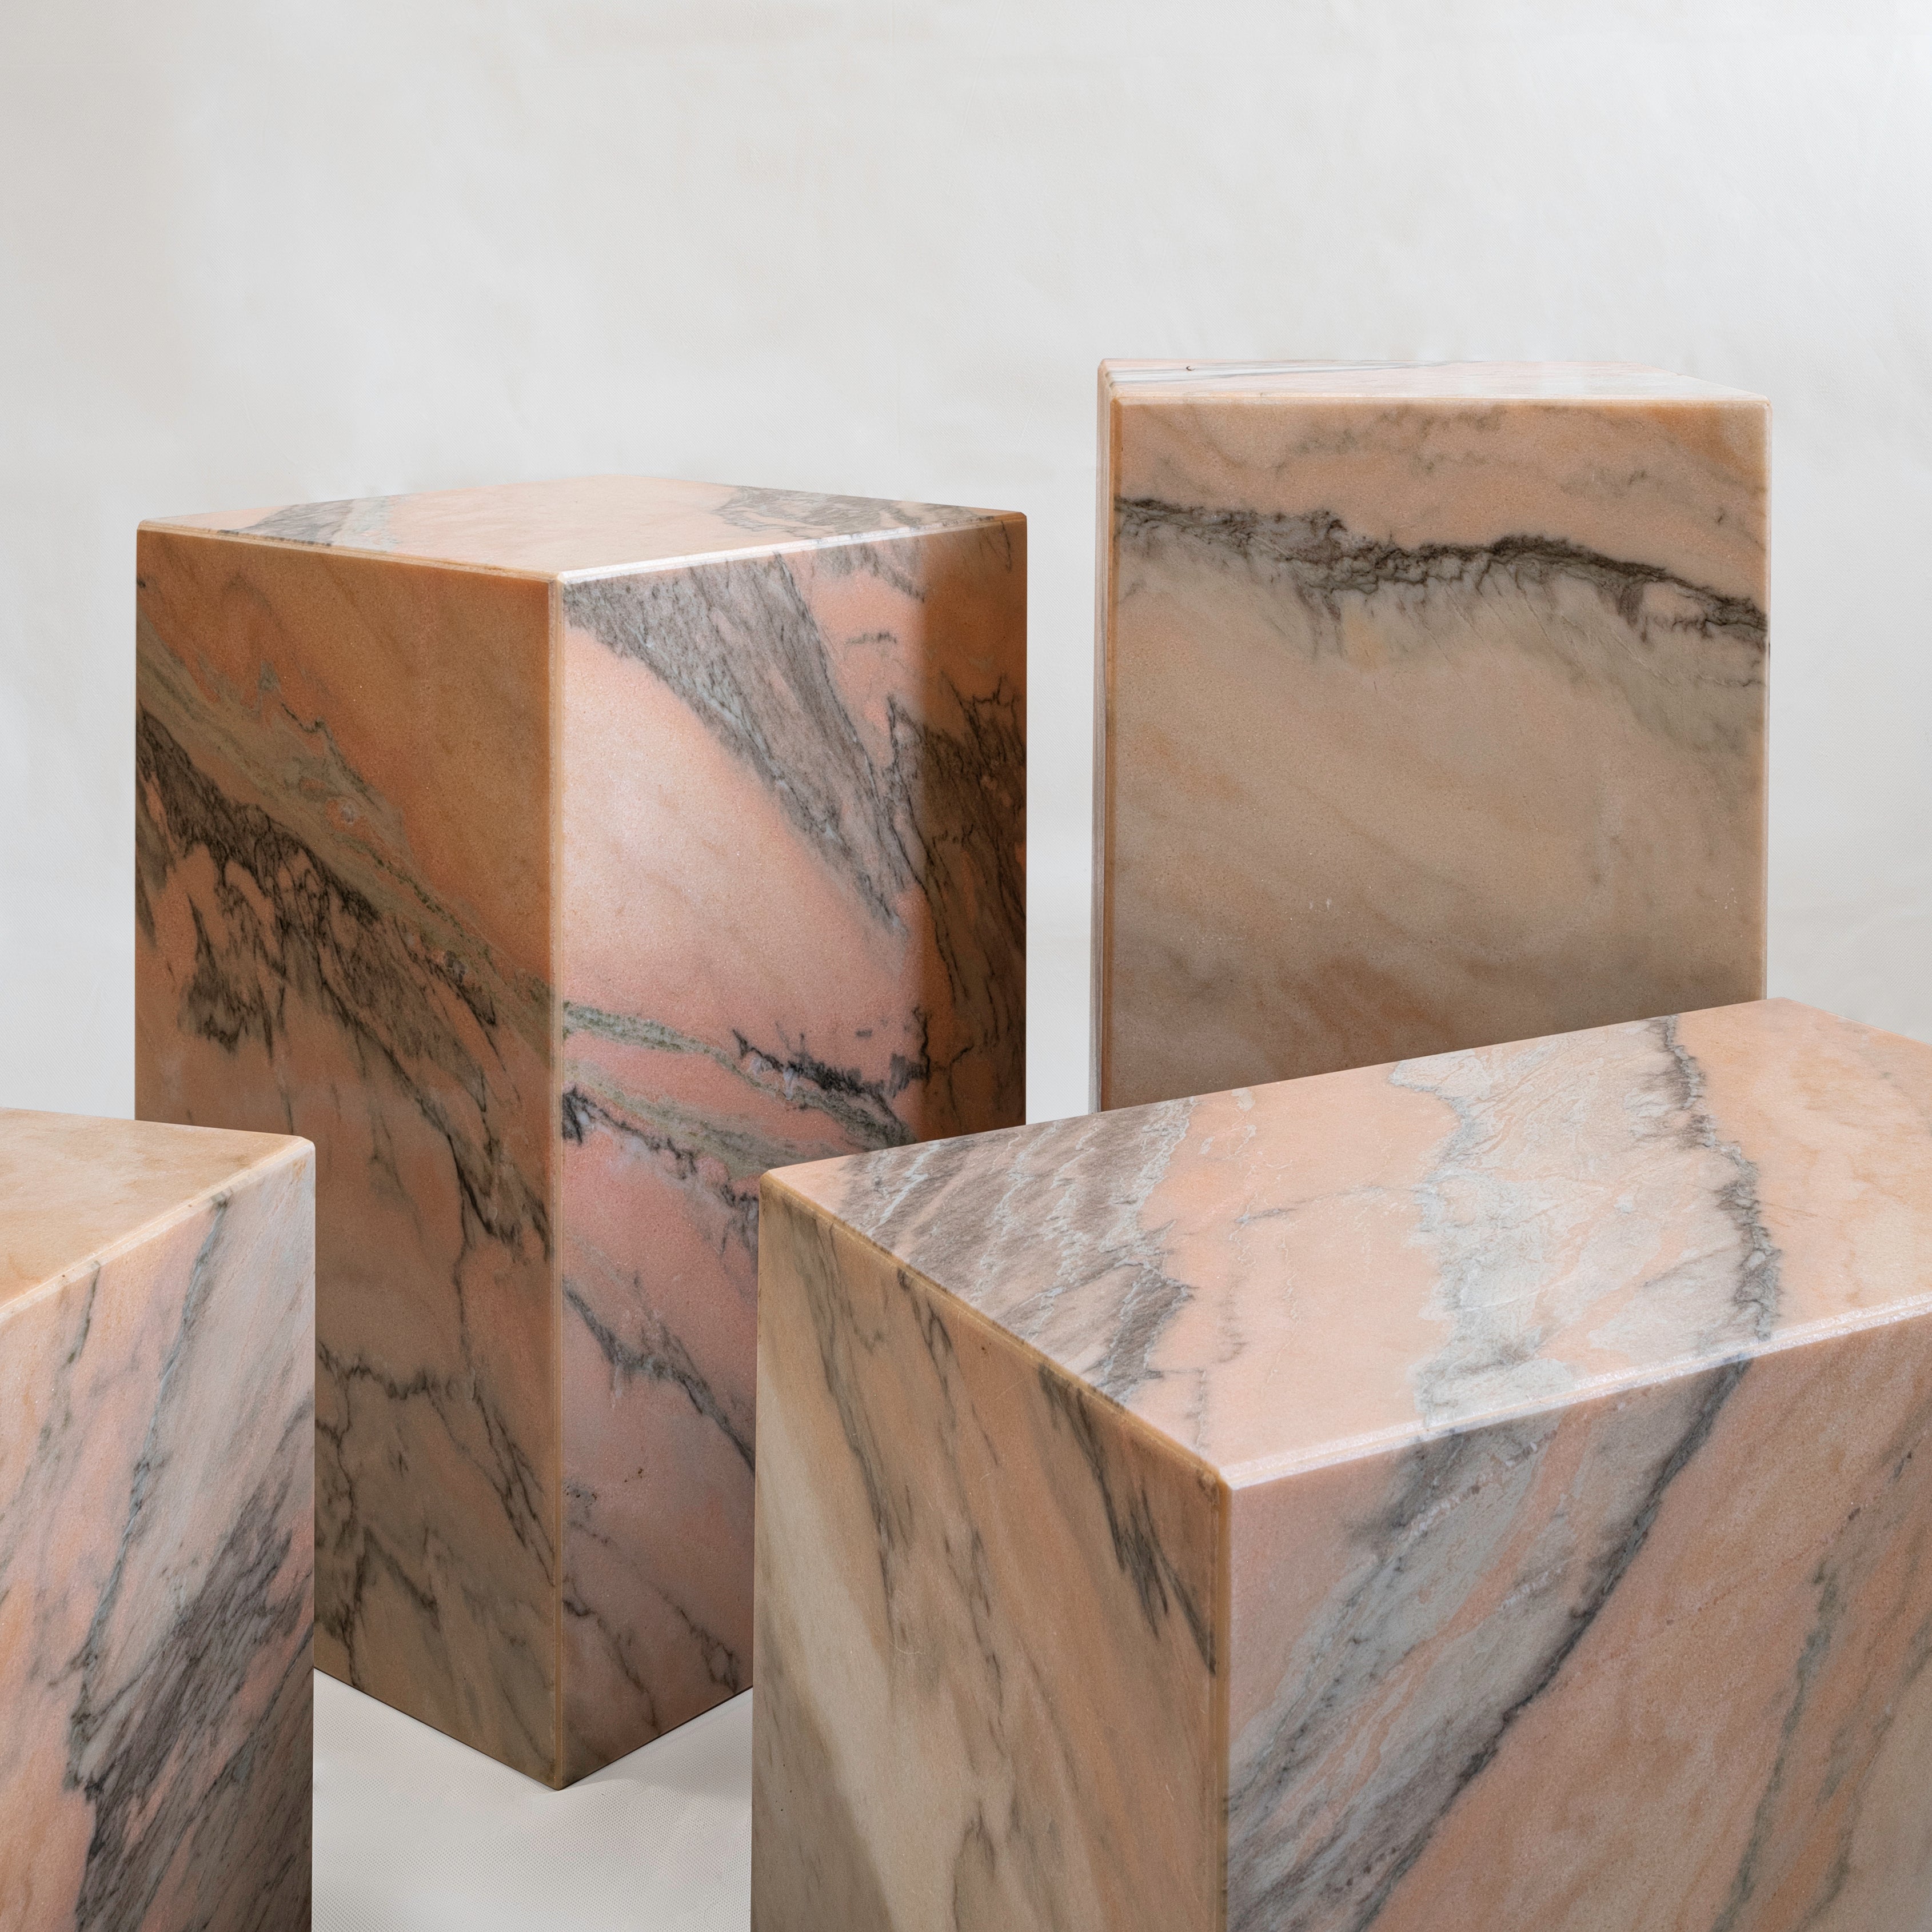 Cubes Side Table - Reha- The Mob Collective